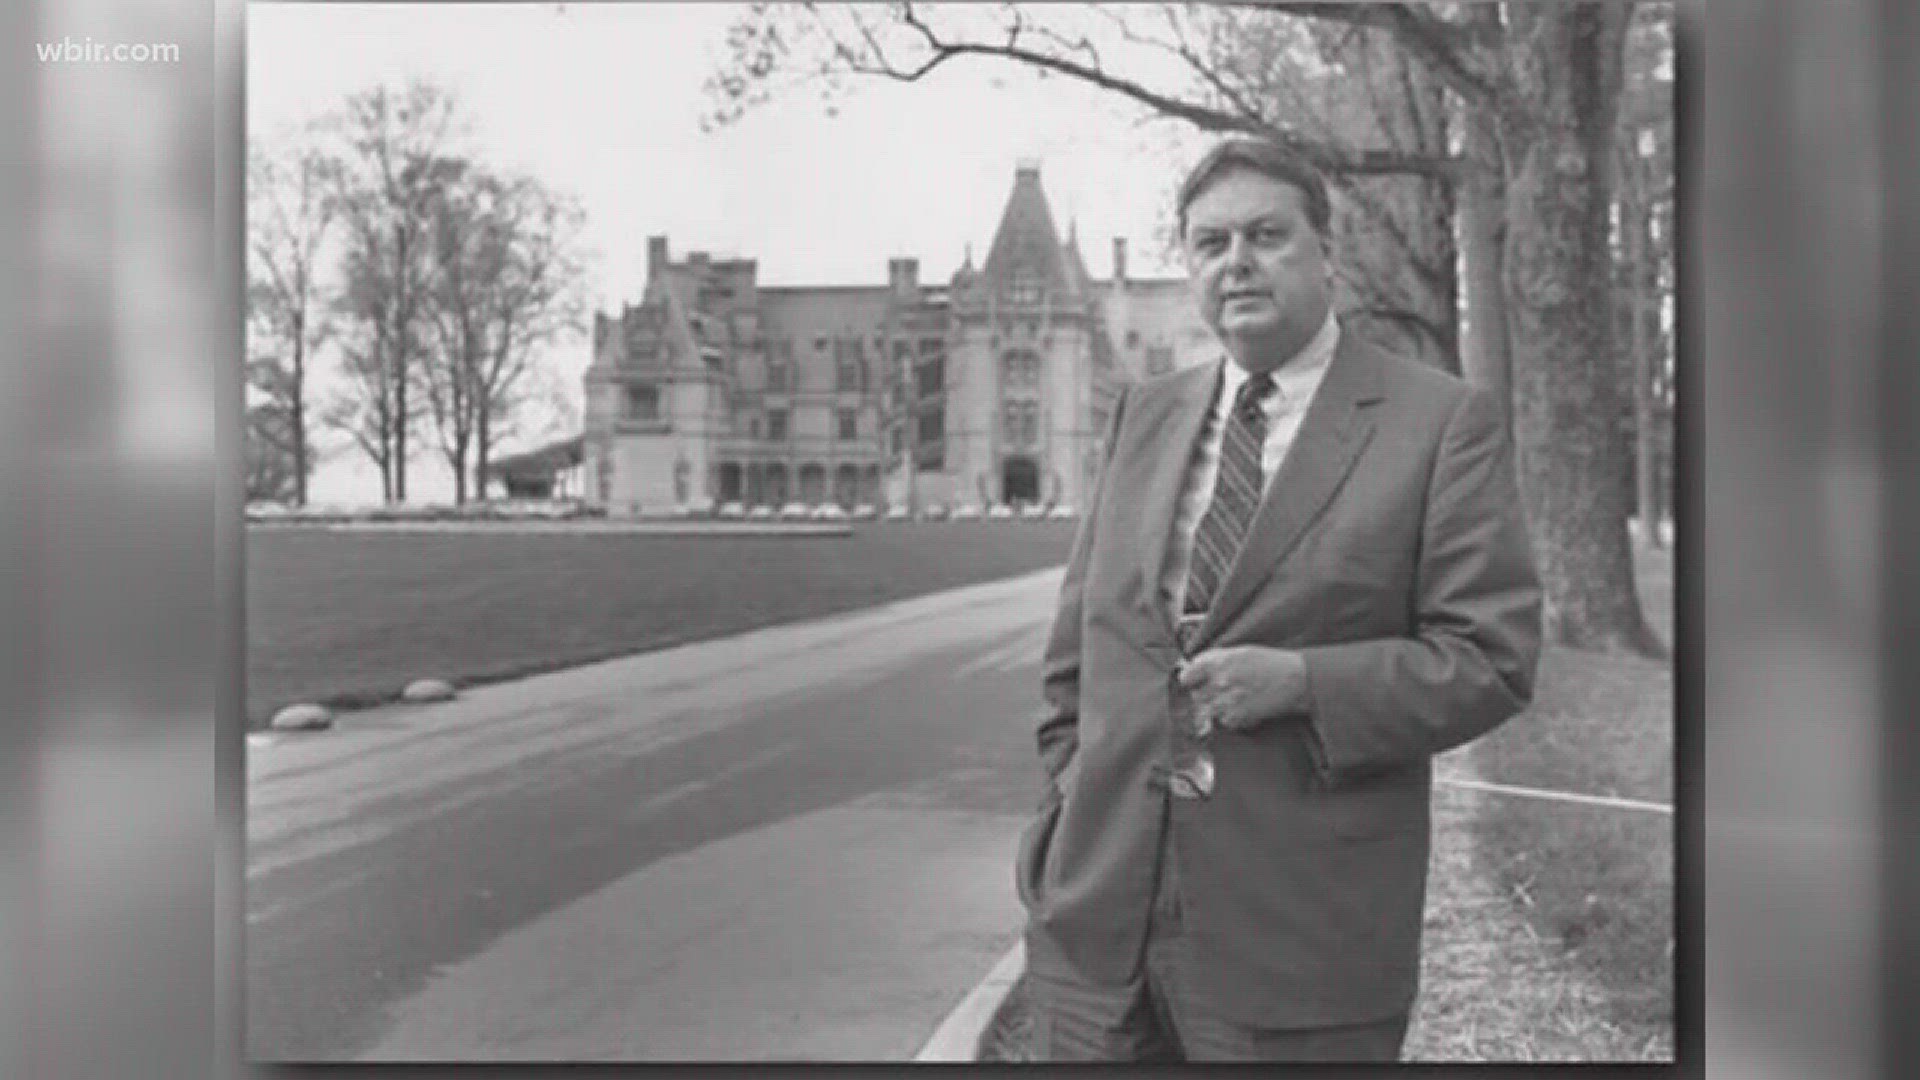 Oct. 31, 2017: The owner of the Biltmore Estate has died in his Asheville home.